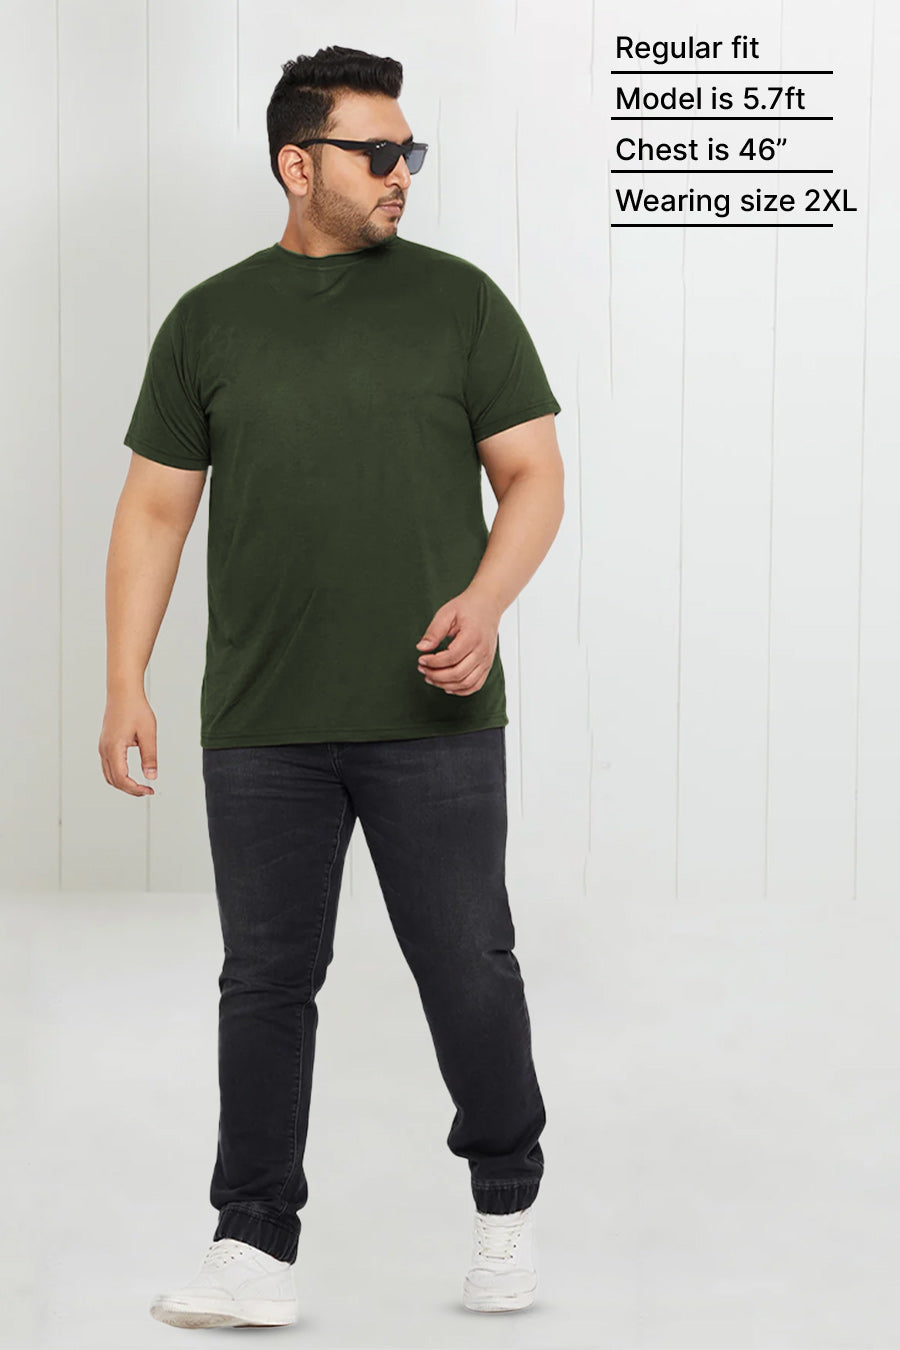 Plus Size - Army Green - Classic Crew